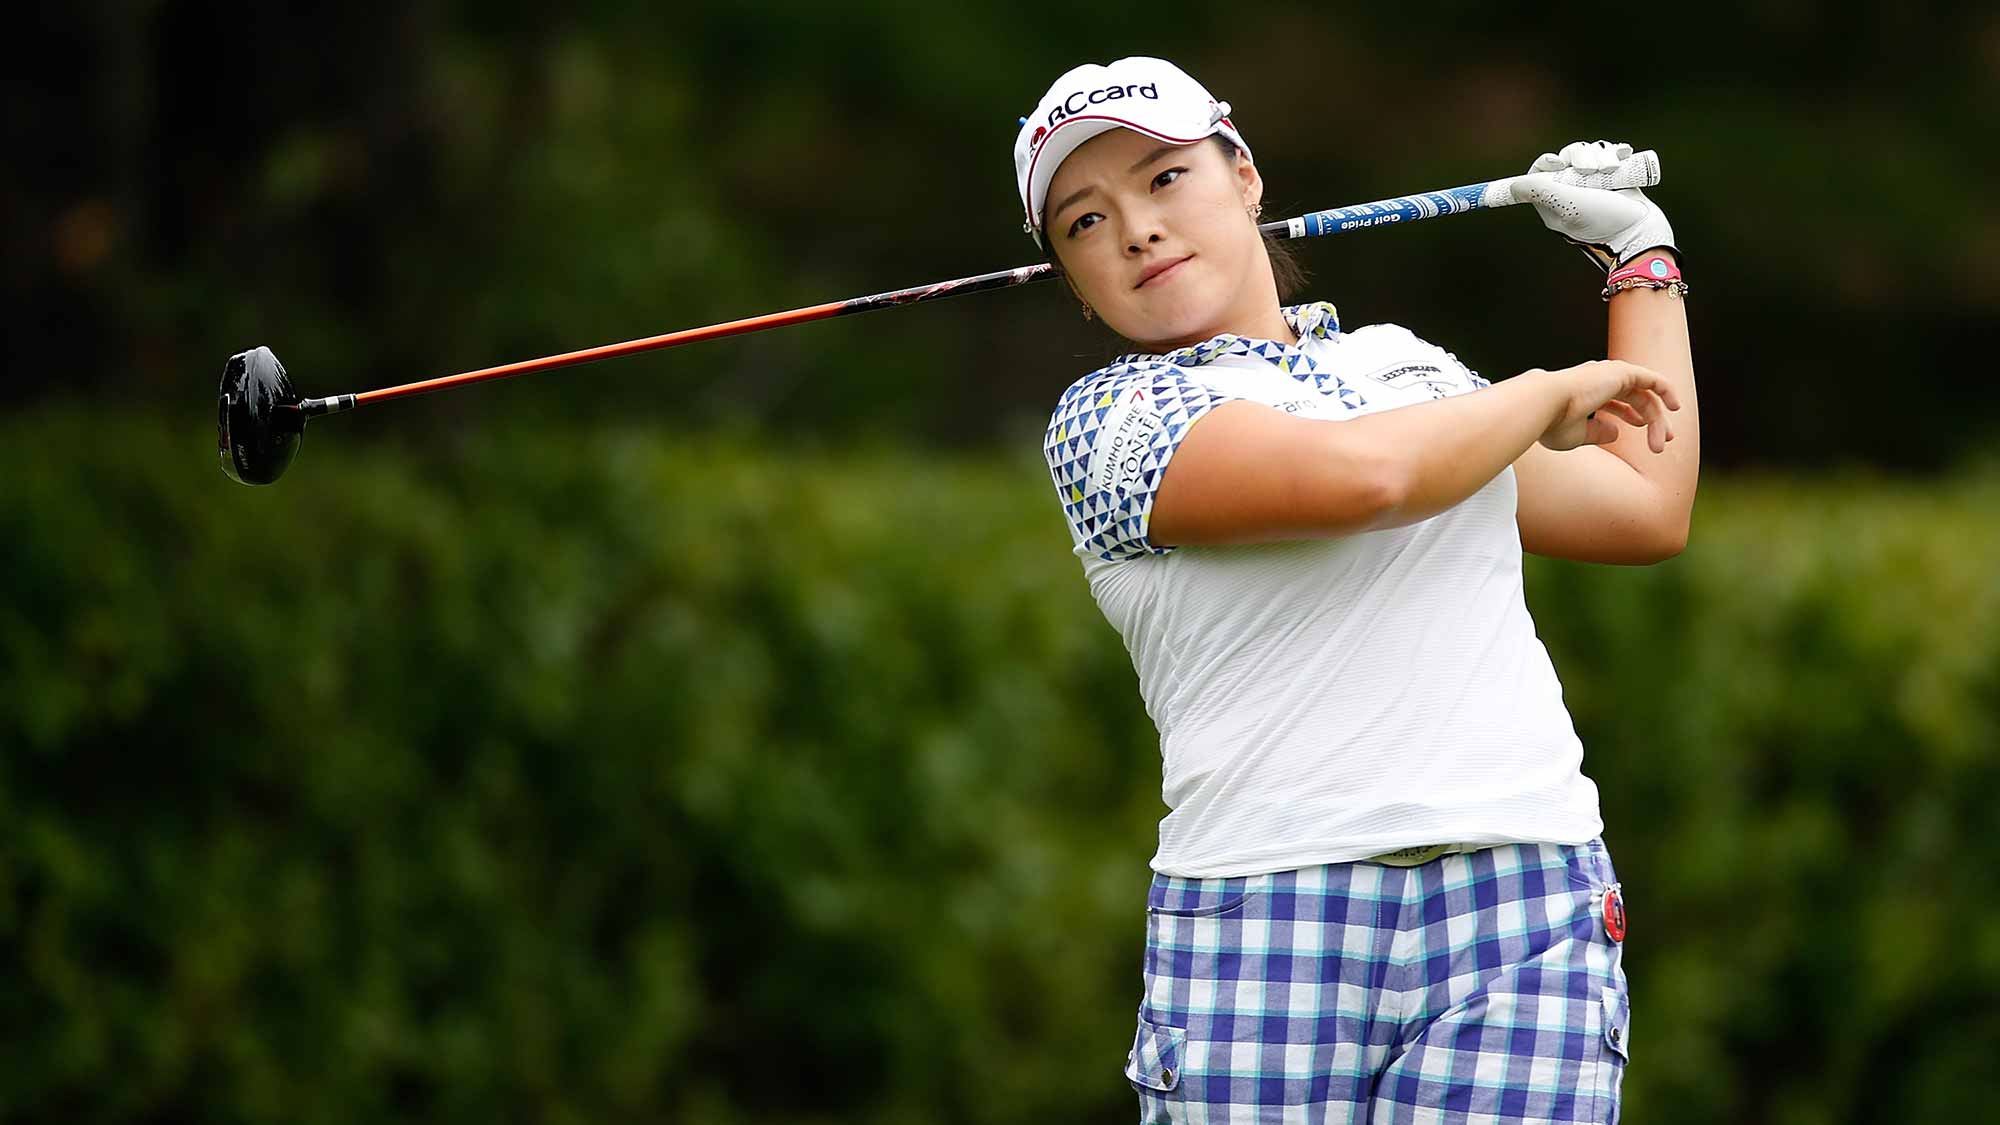 Ha Na Jang of South Korea watches her tee shot on the 16th hole during the first round of the Marathon Classic presented by Owens Corning and O-I at Highland Meadows Golf Club